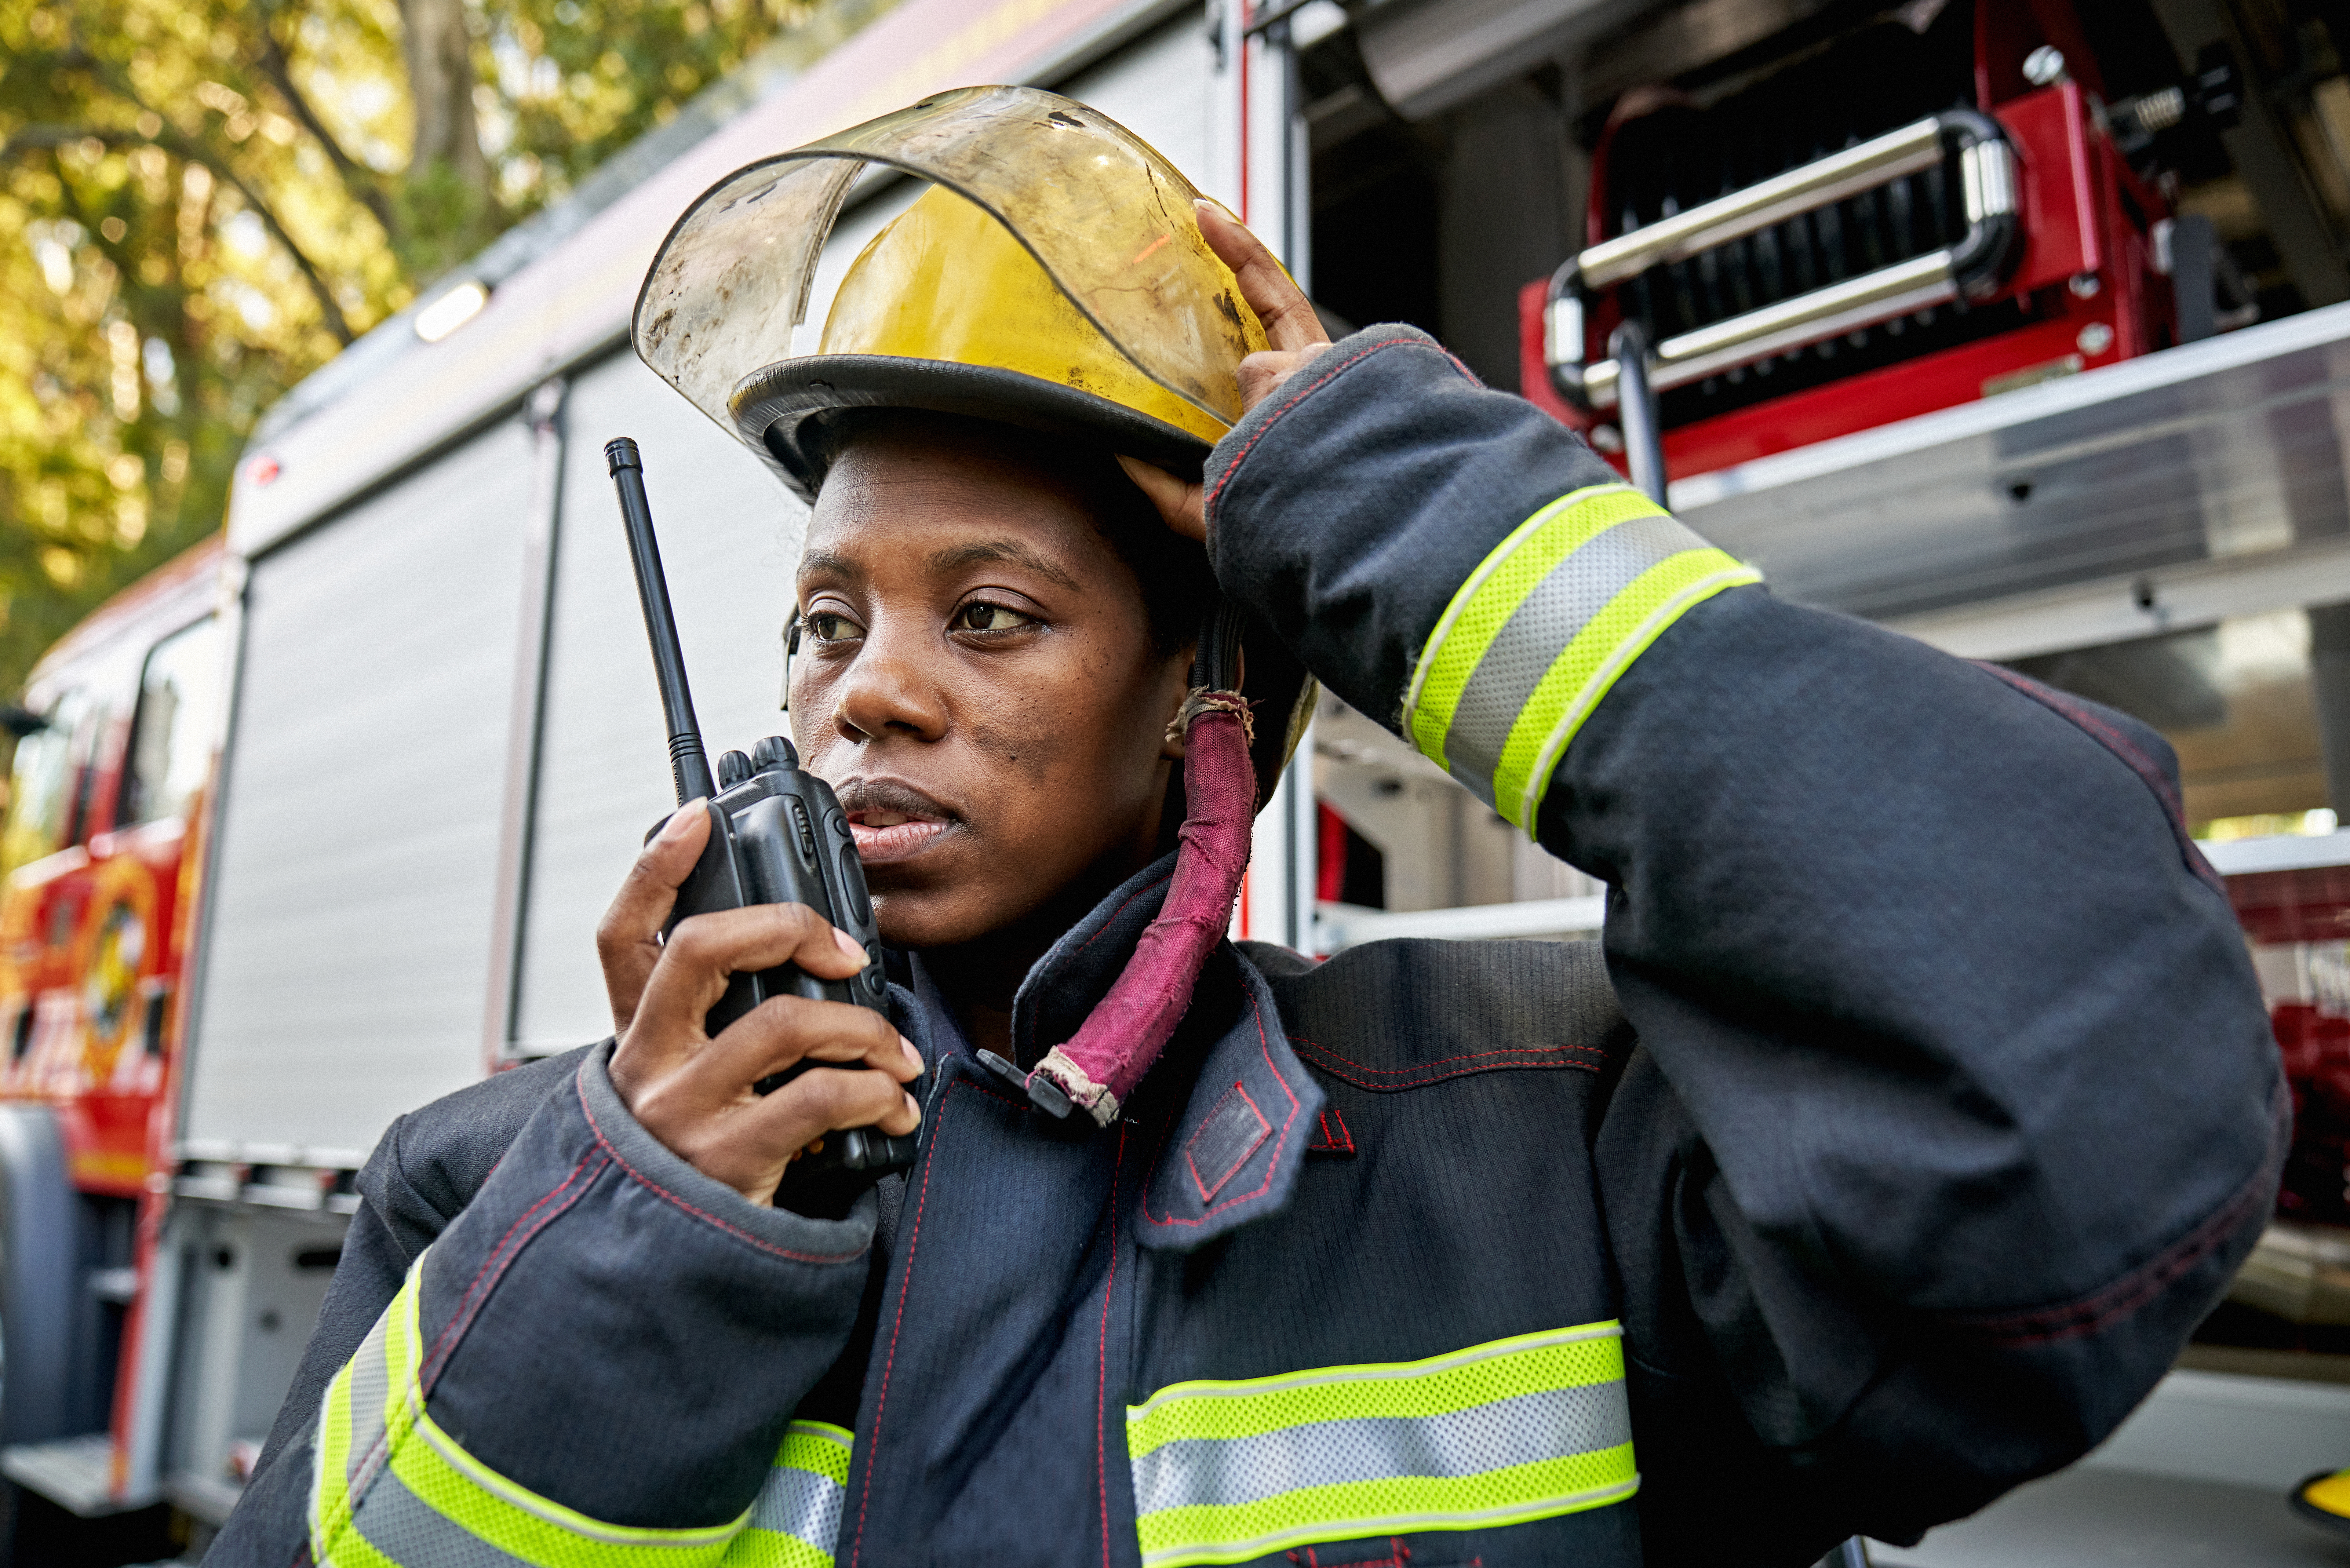 On A Positive Note: Black Women Firefighters Make History as First Female Captains